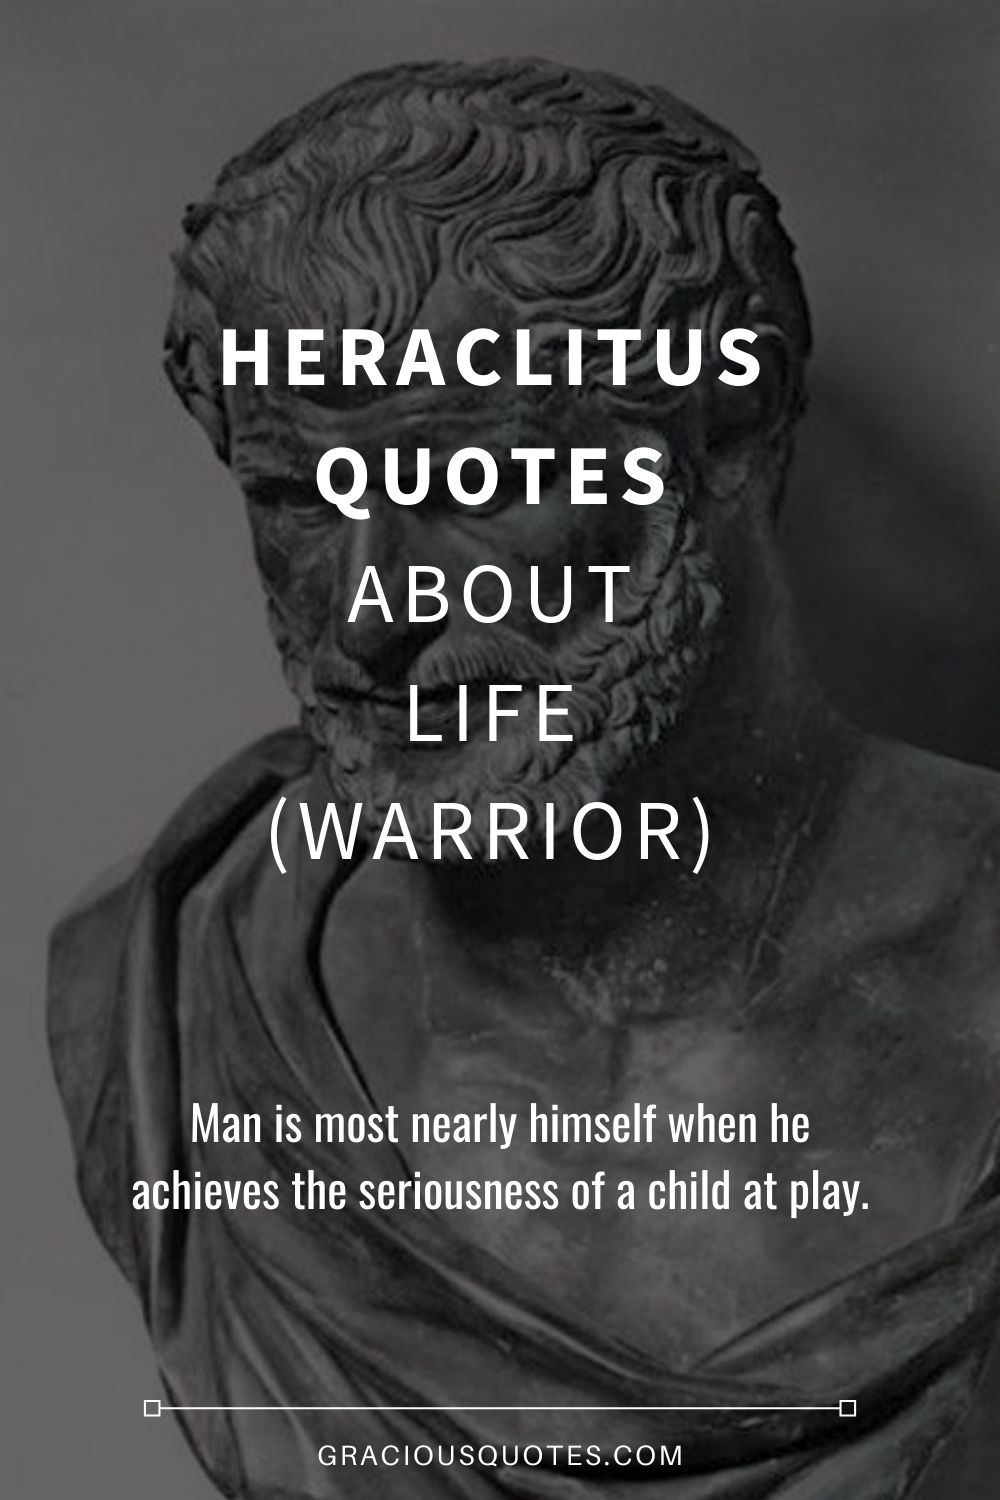 41 Heraclitus Quotes About Life Warrior